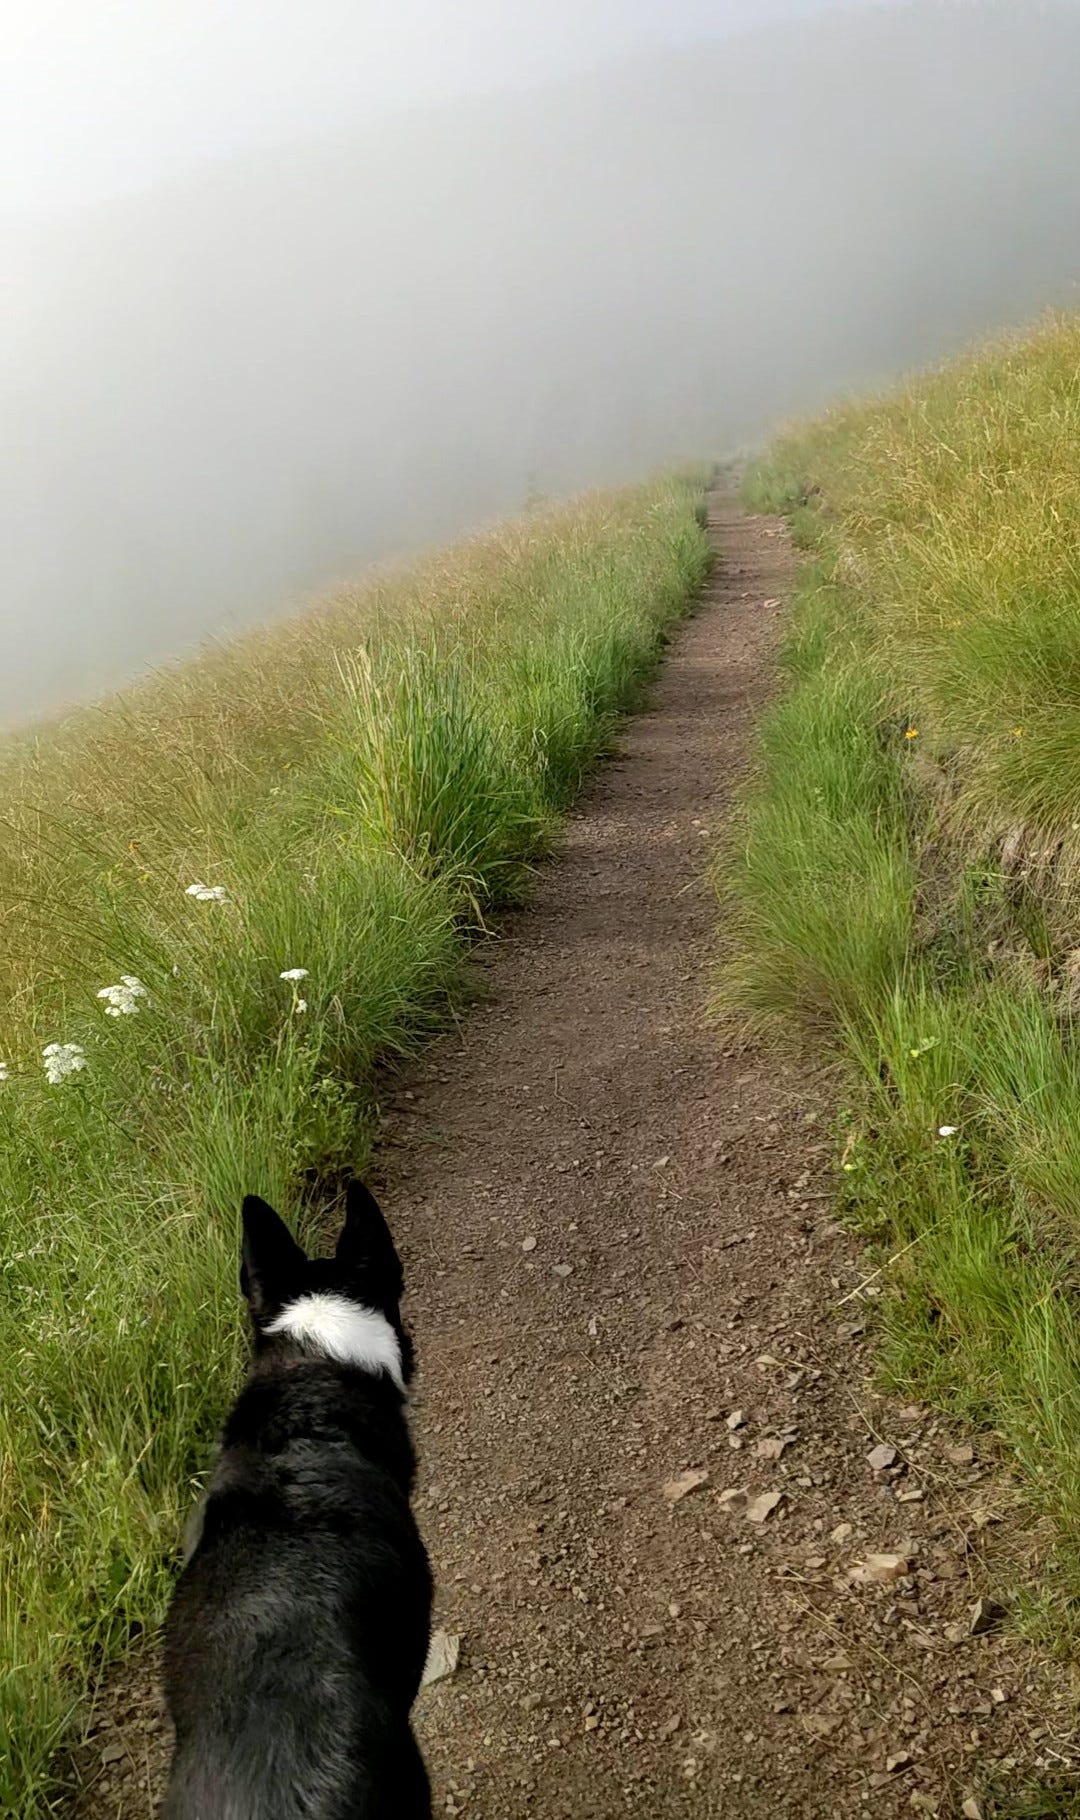 Dog heading up a trail into mist